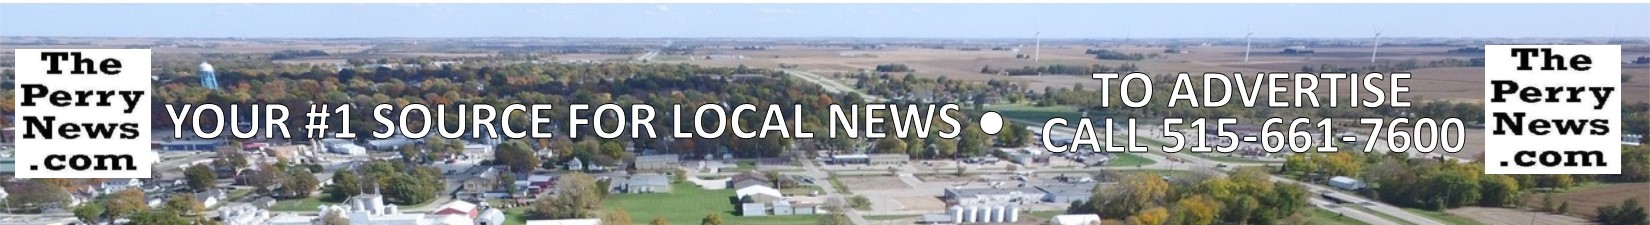 your-first-source-for-local-news-banner